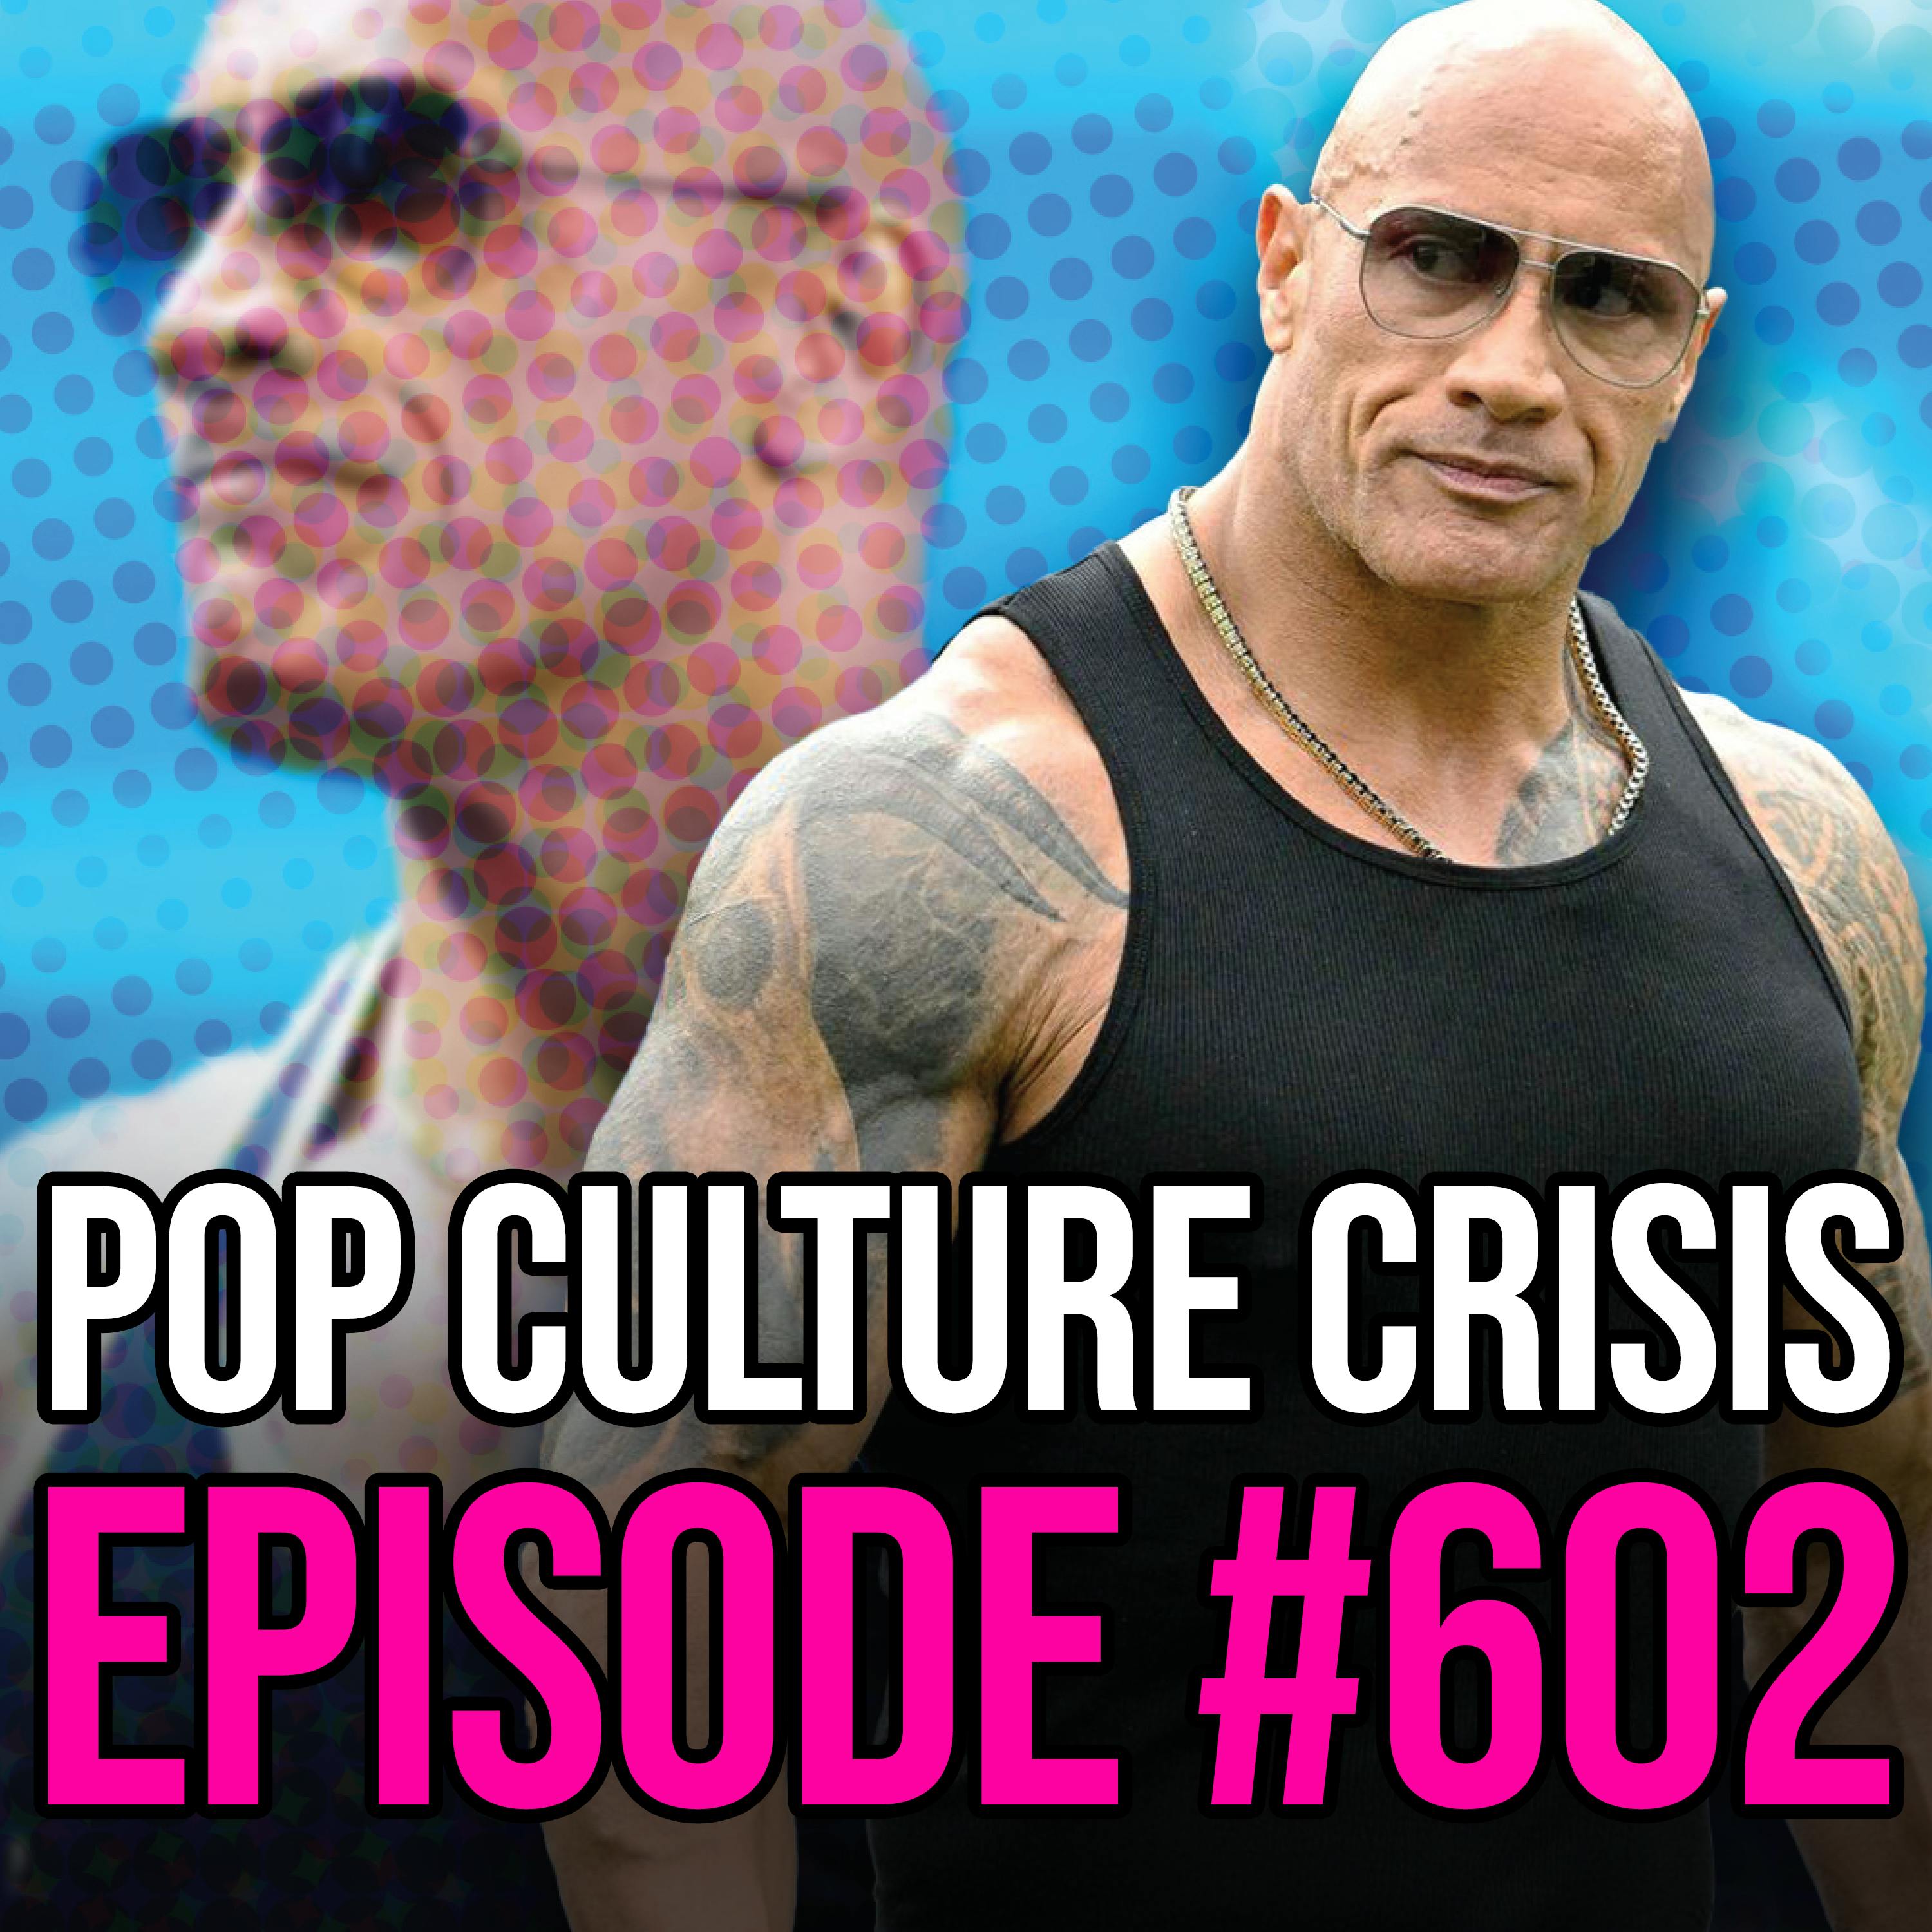 EPISODE 602: The Rock Goes Full Diva? Russell Brand Baptism, Insanity at ’Fall Guy’ Premiere